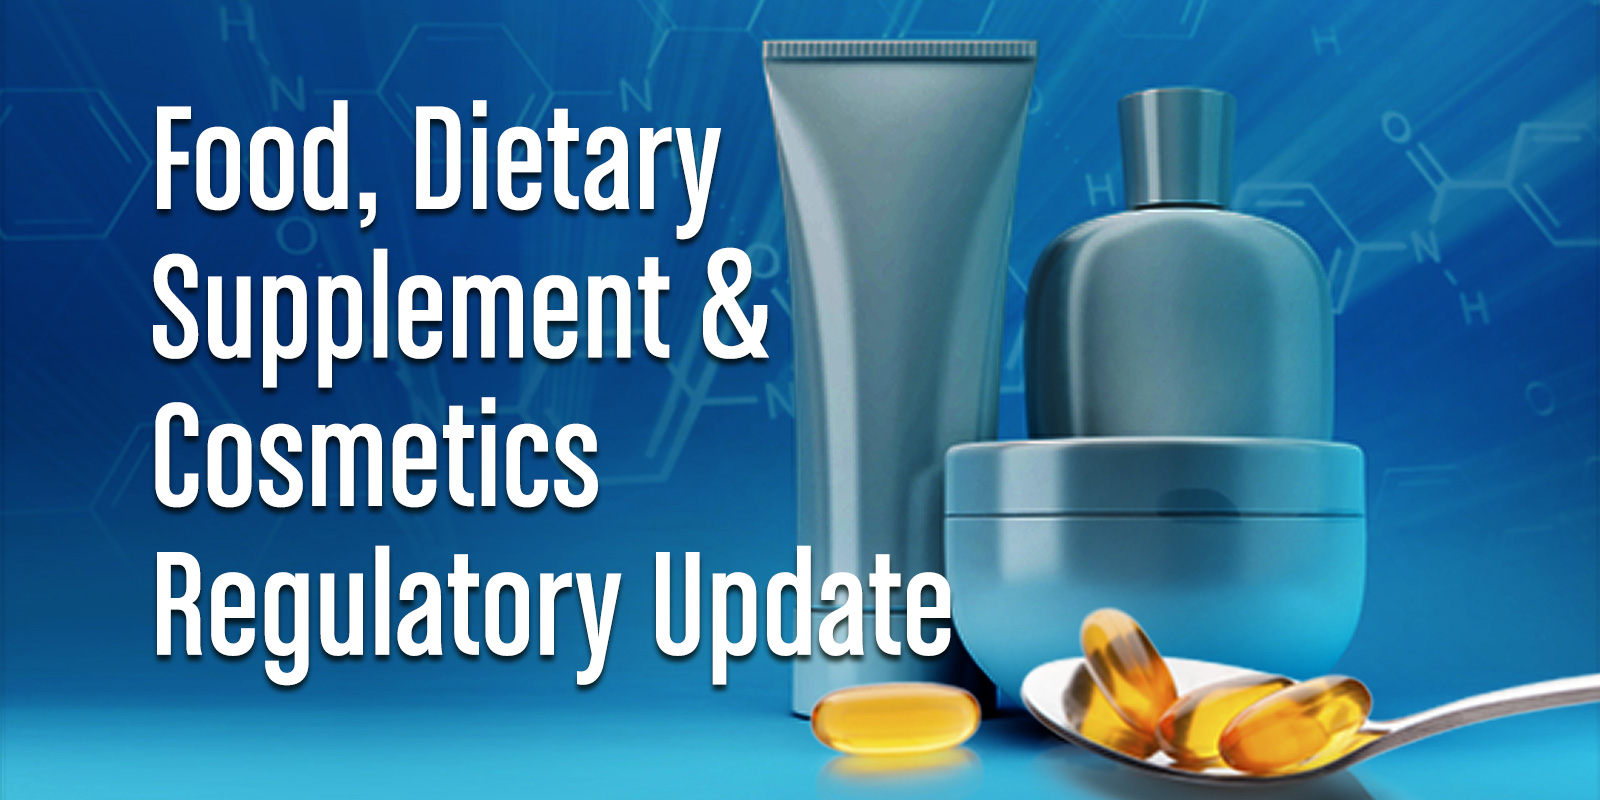 Food, Dietary Supplement & Cosmetics Update | Vol. V, Issue 1